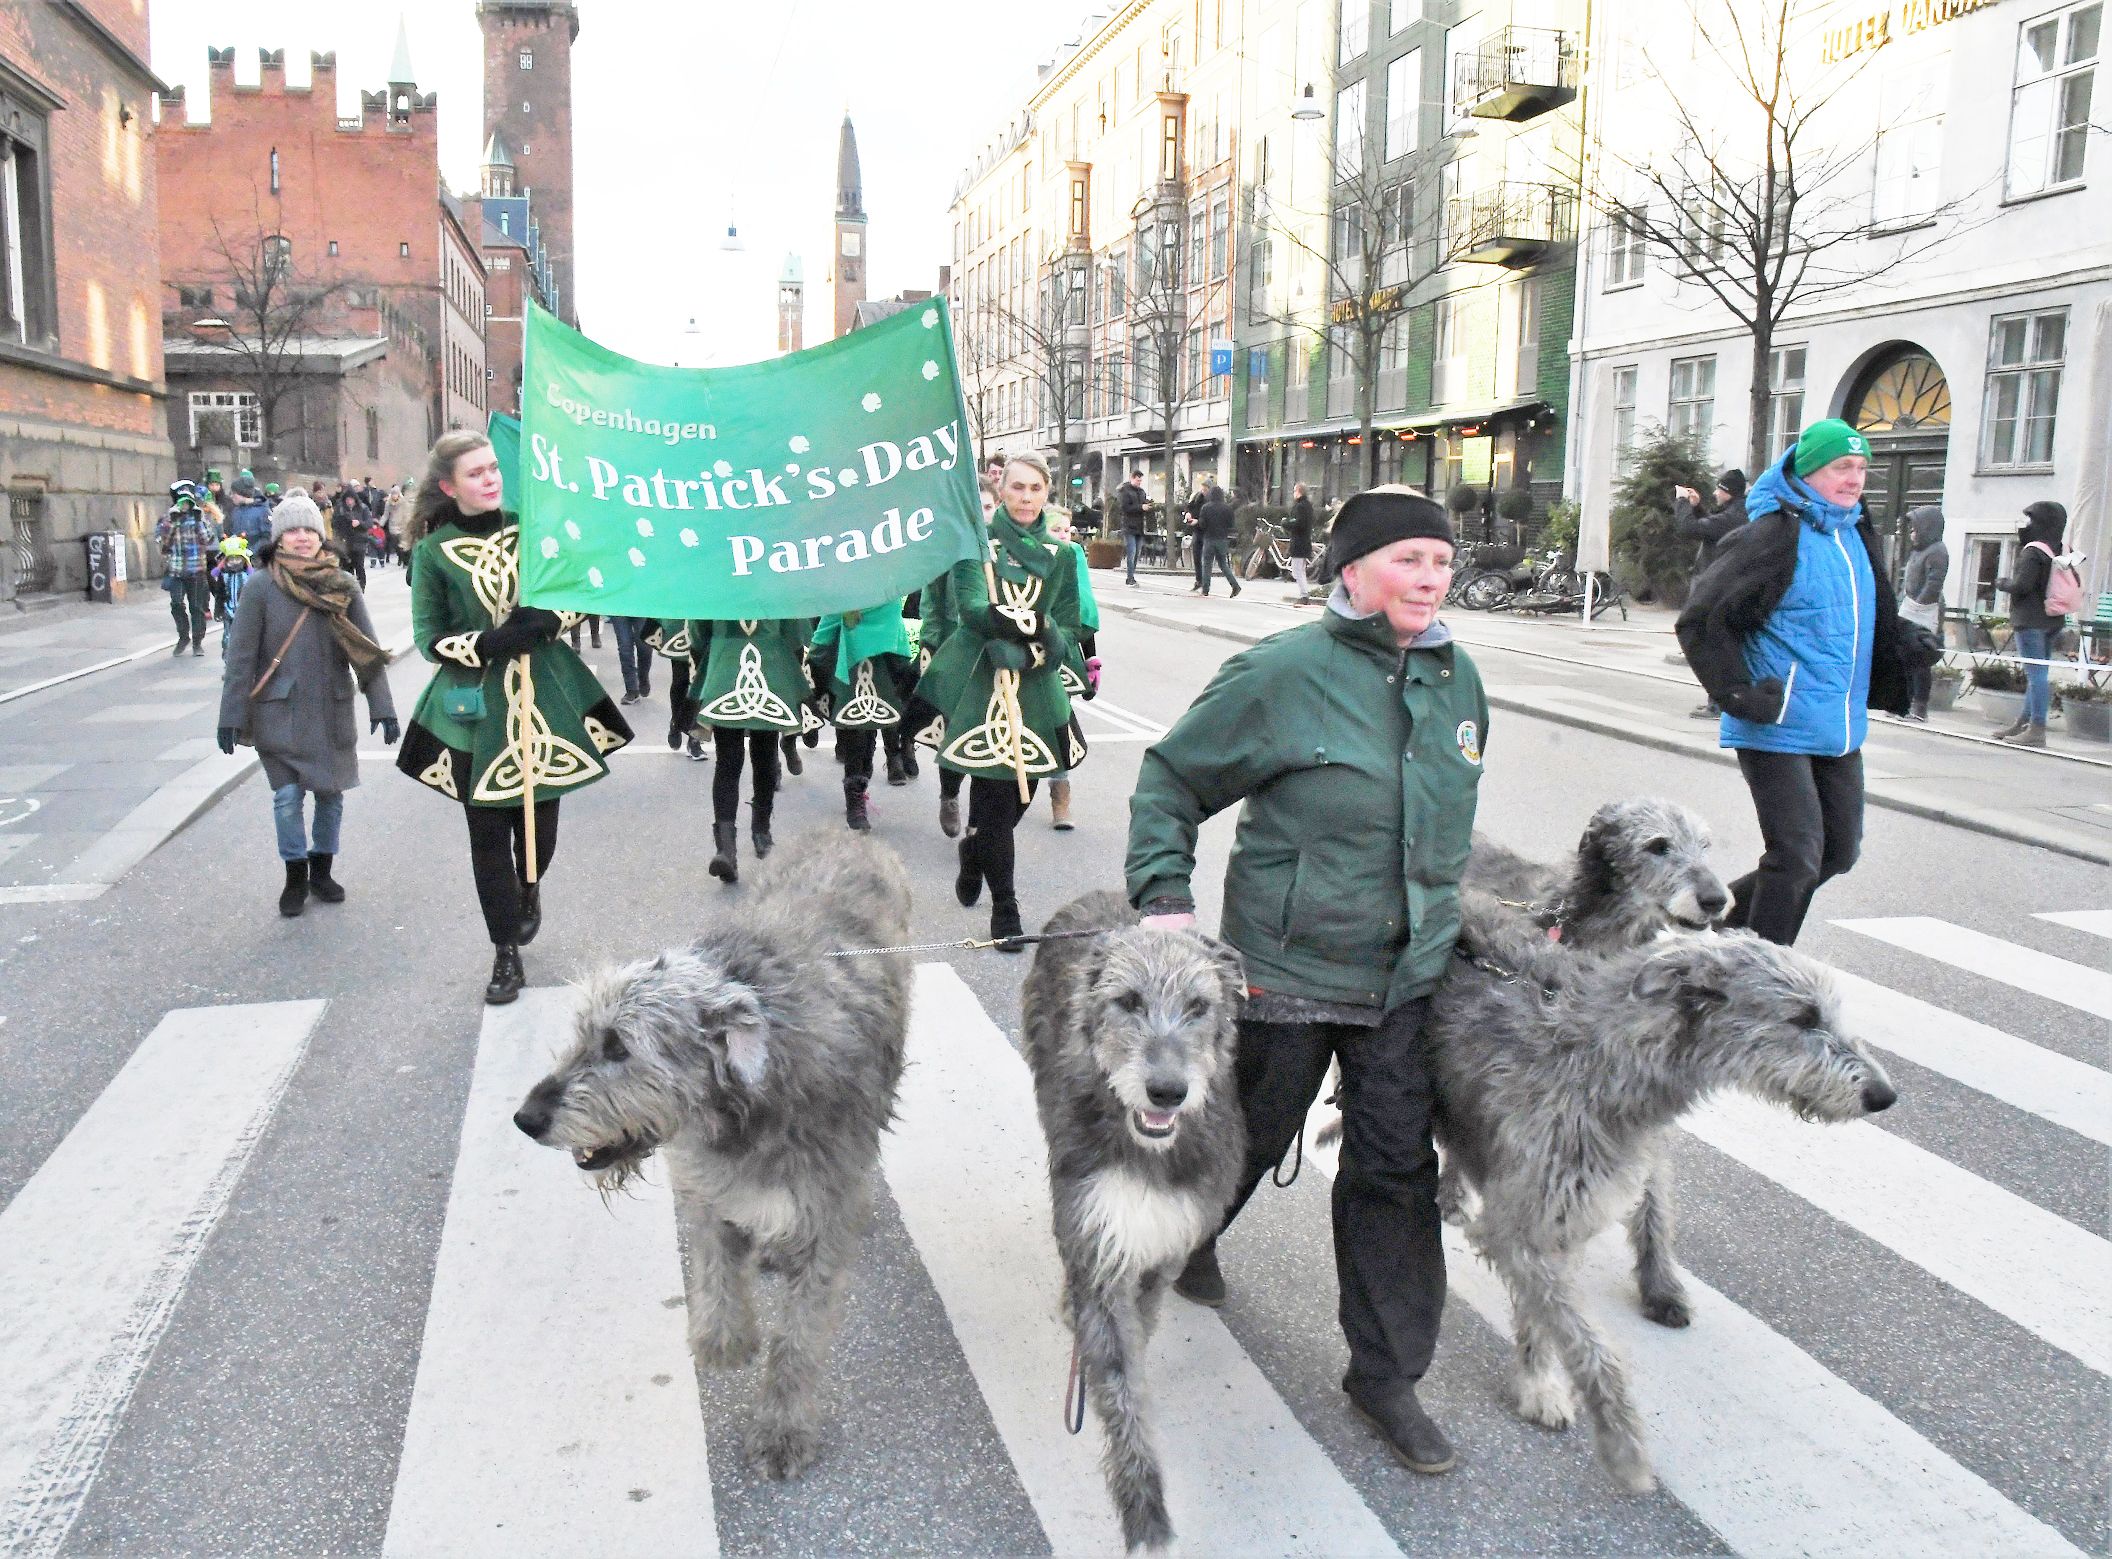 St Patrick’s Day 2022: Embrace the feast day where everyone is Irish